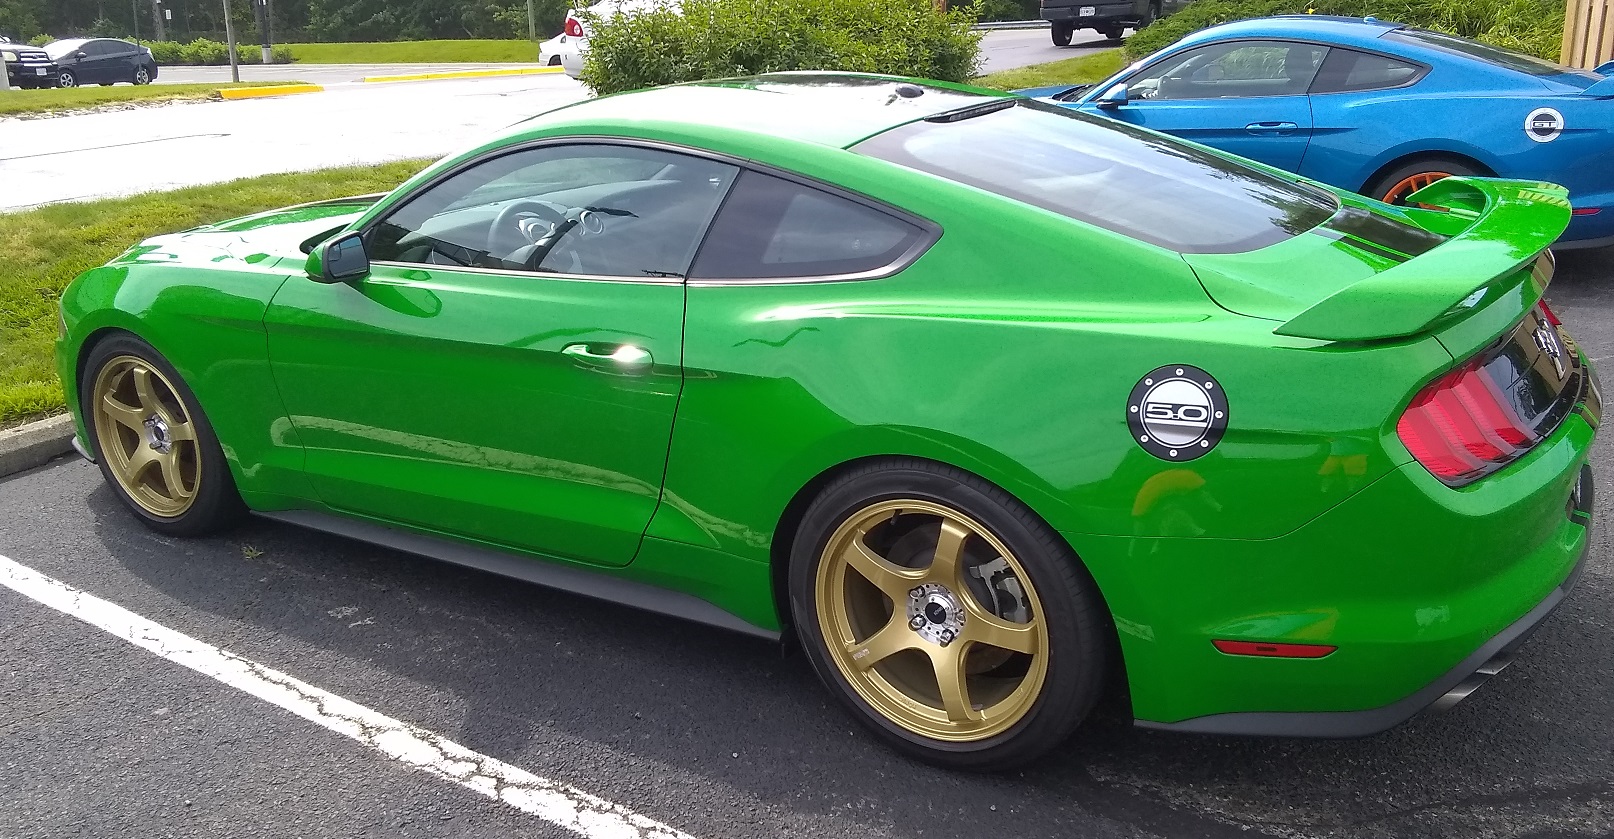 green-mustang-with-gold-wheels-1.jpg